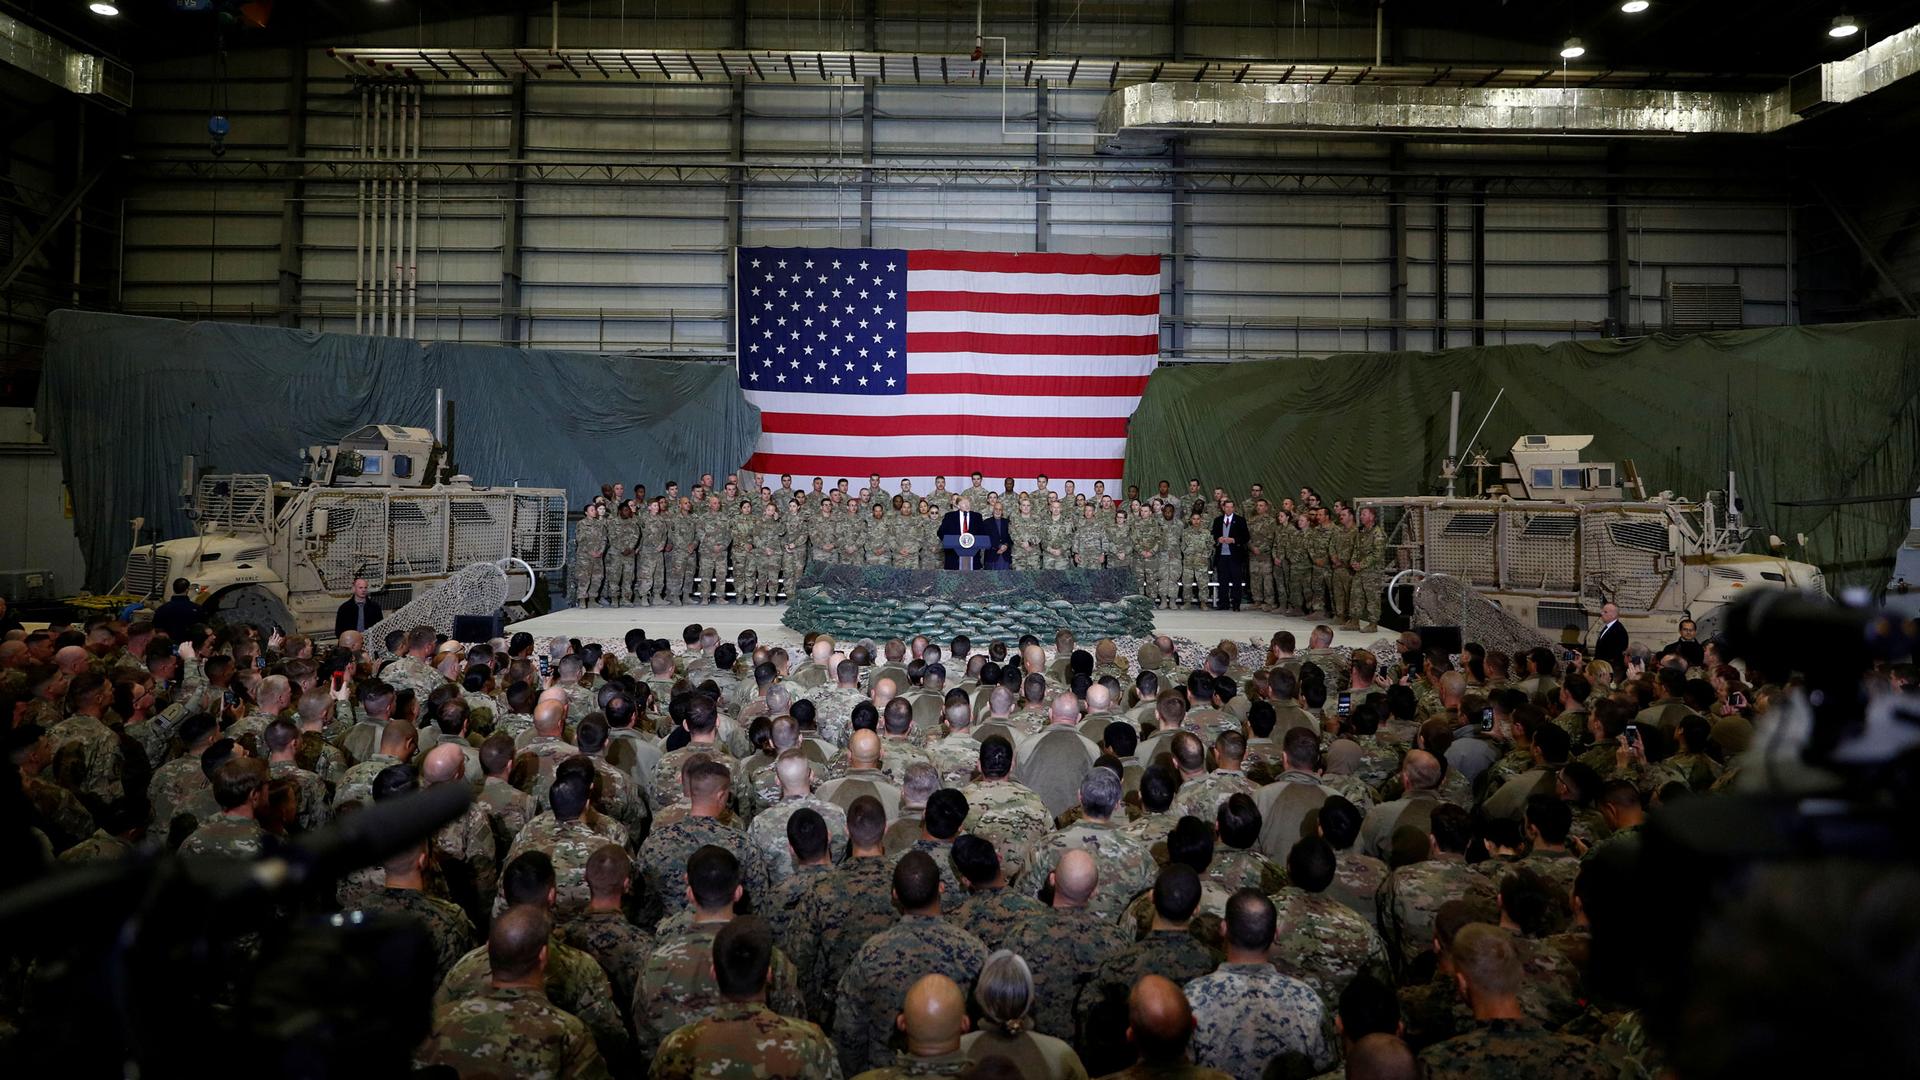 A crowd of US service members stand in front of Trump, with a large US flag in the background